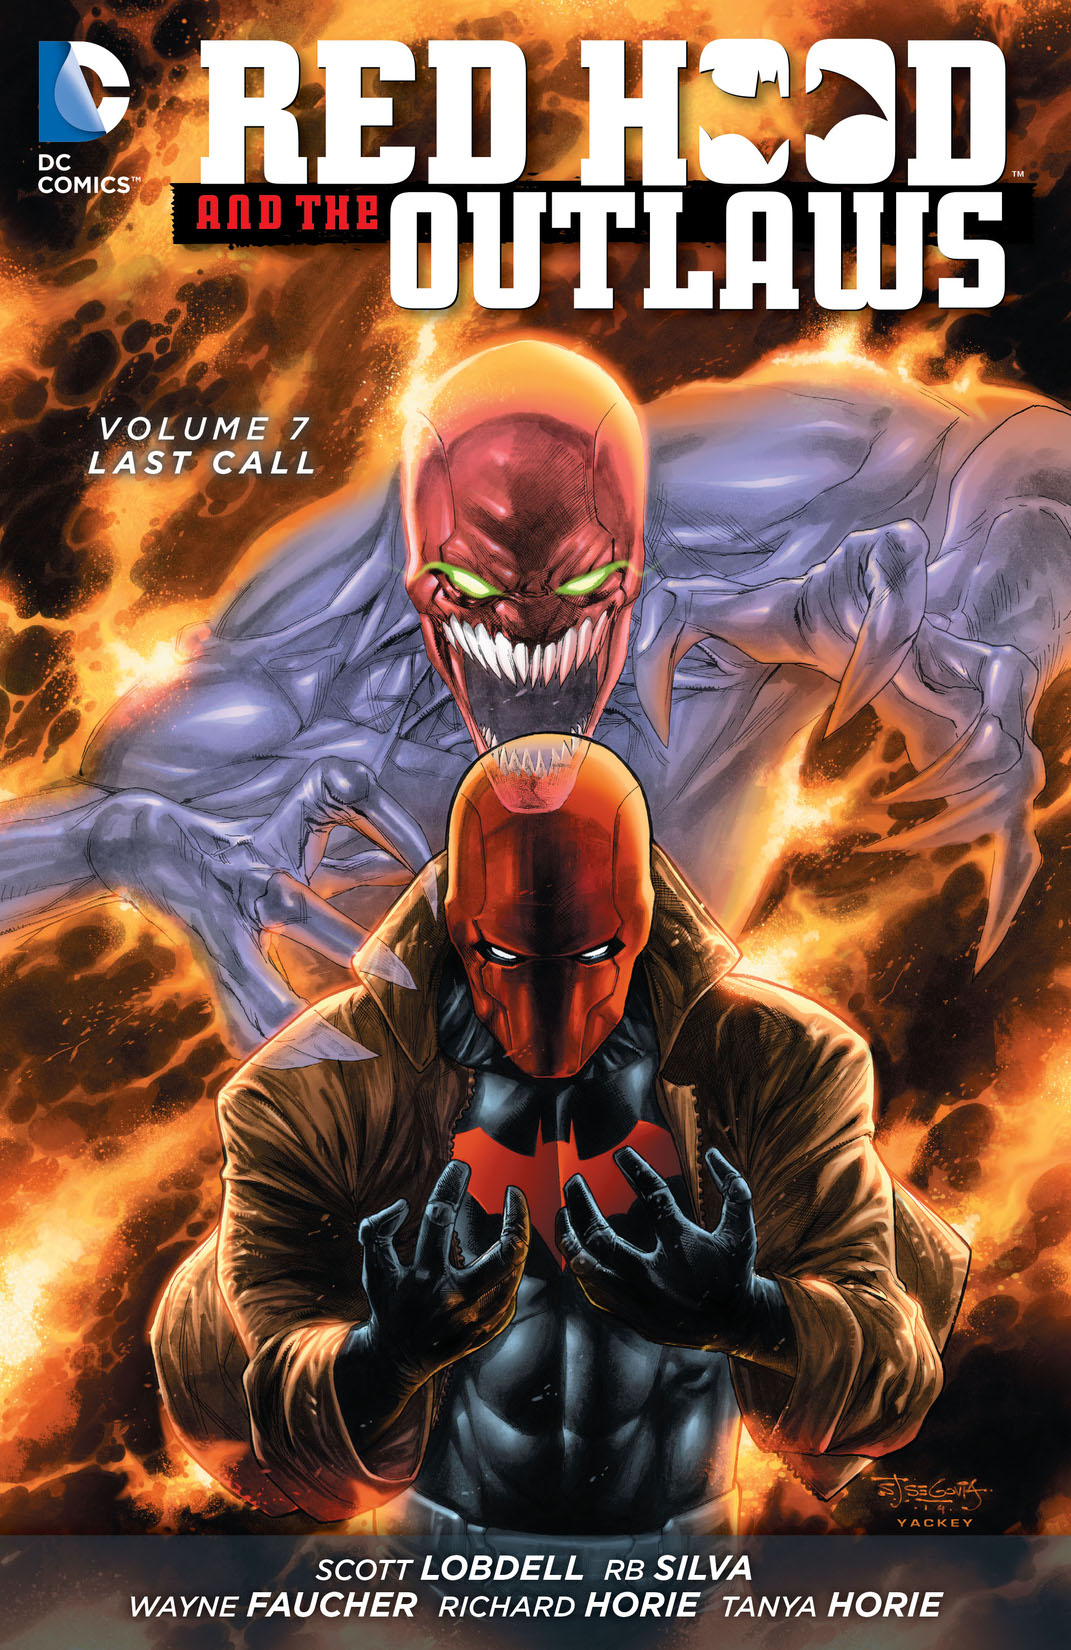 Red Hood and the Outlaws Vol. 7: Last Call preview images